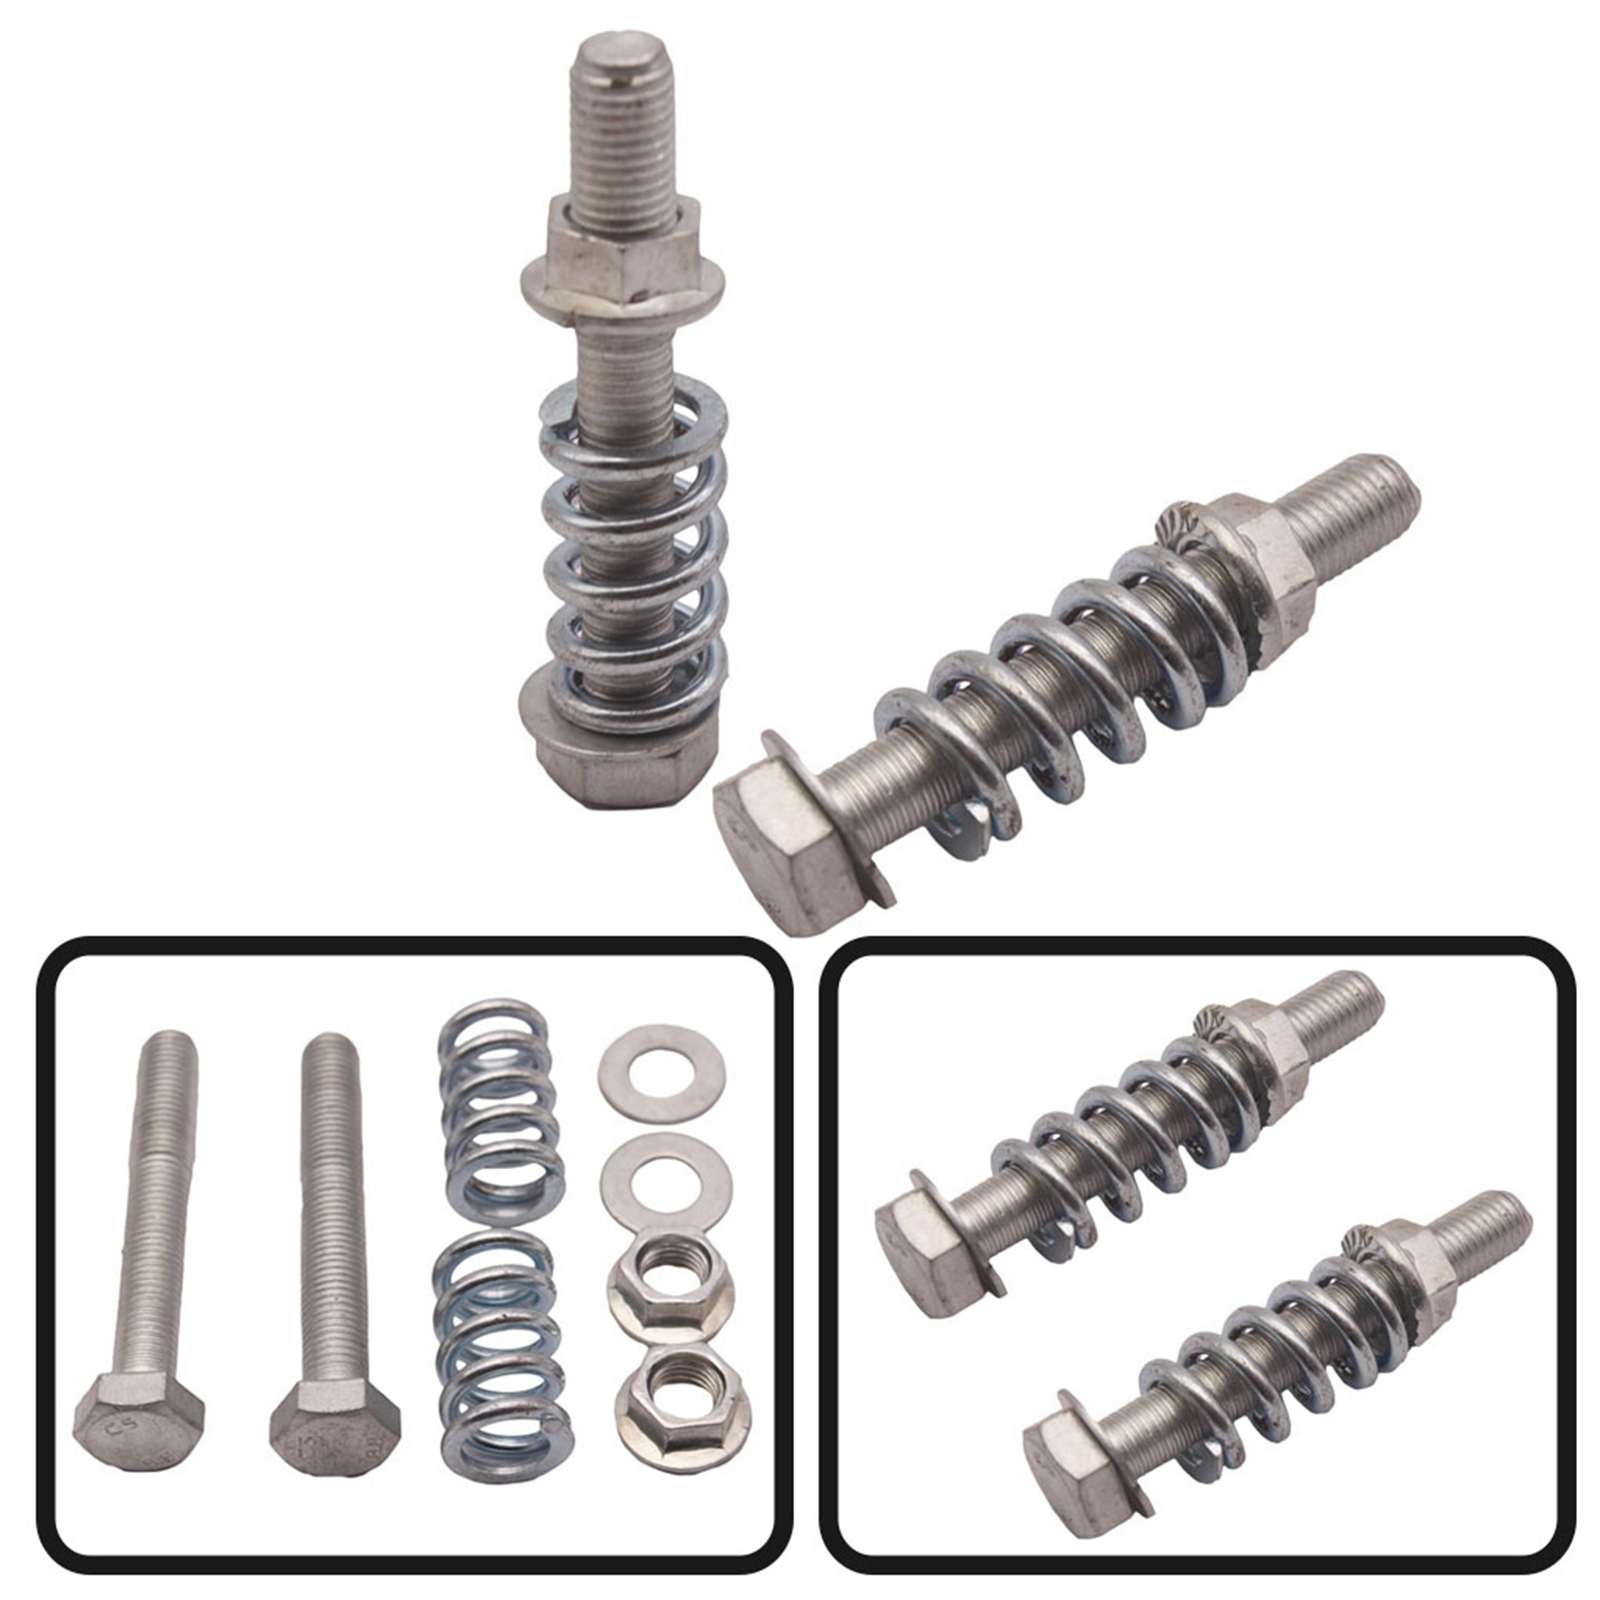 2x M10x1.5 Exhaust Bolt and Spring Hardware Set Repair Parts Professional